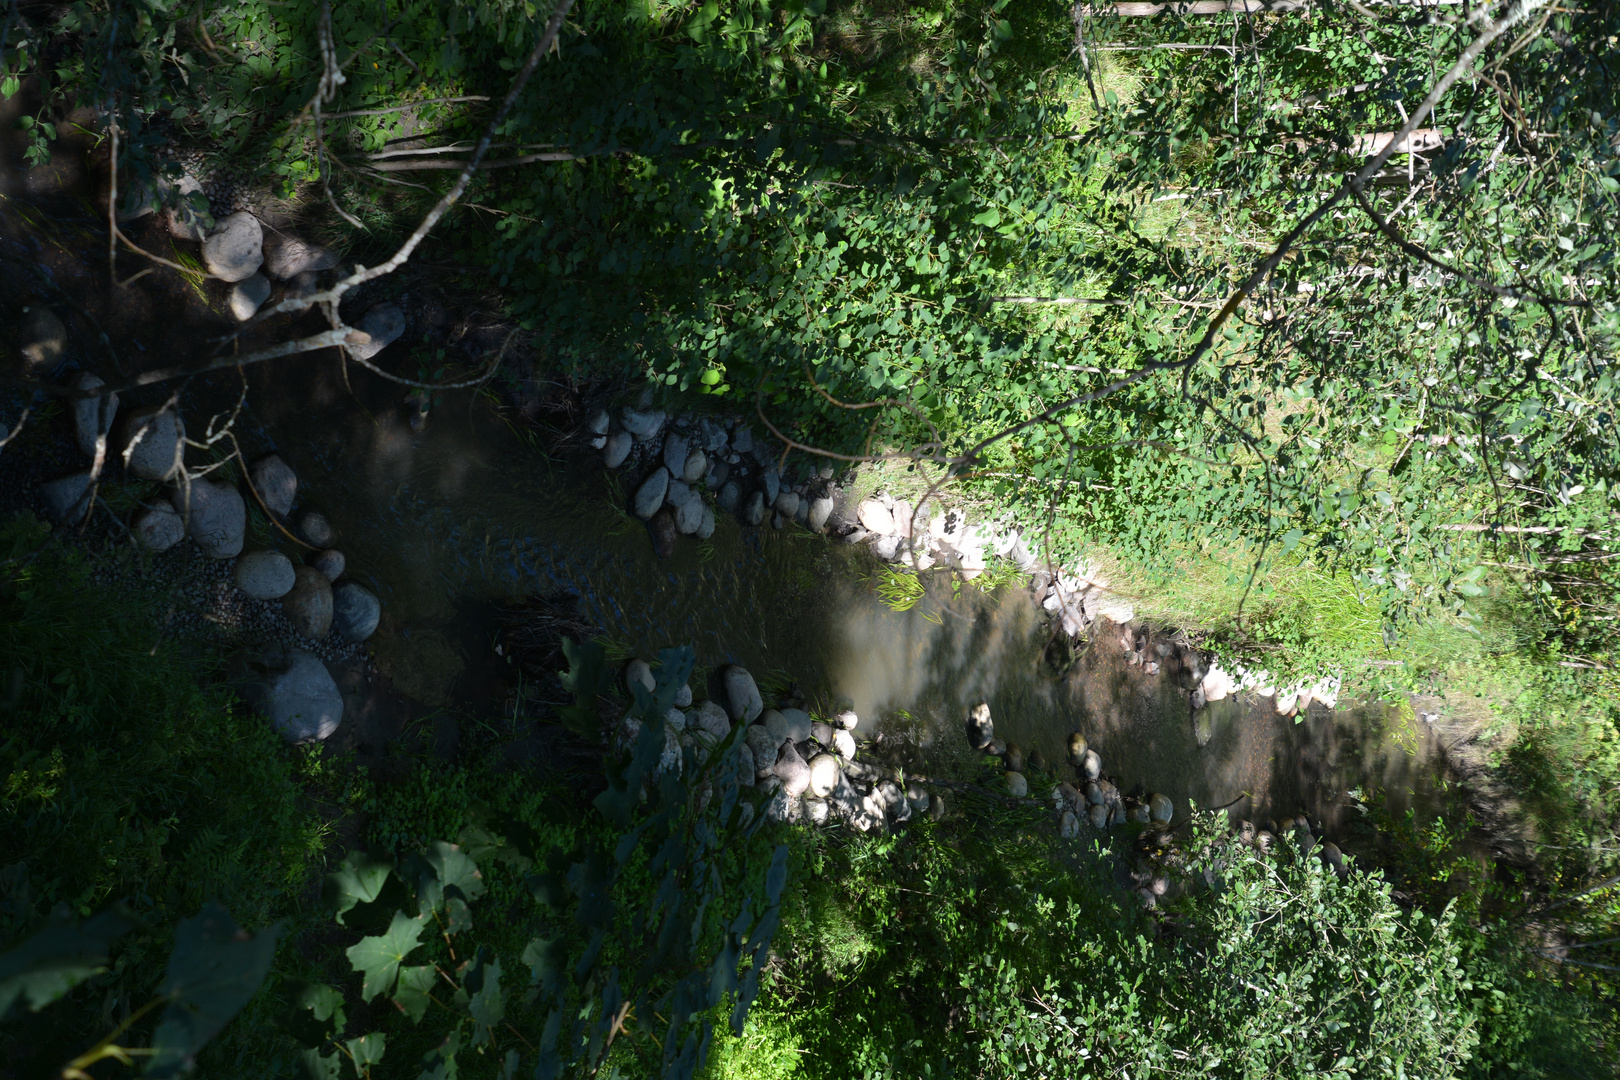 The small brook where lives trouts